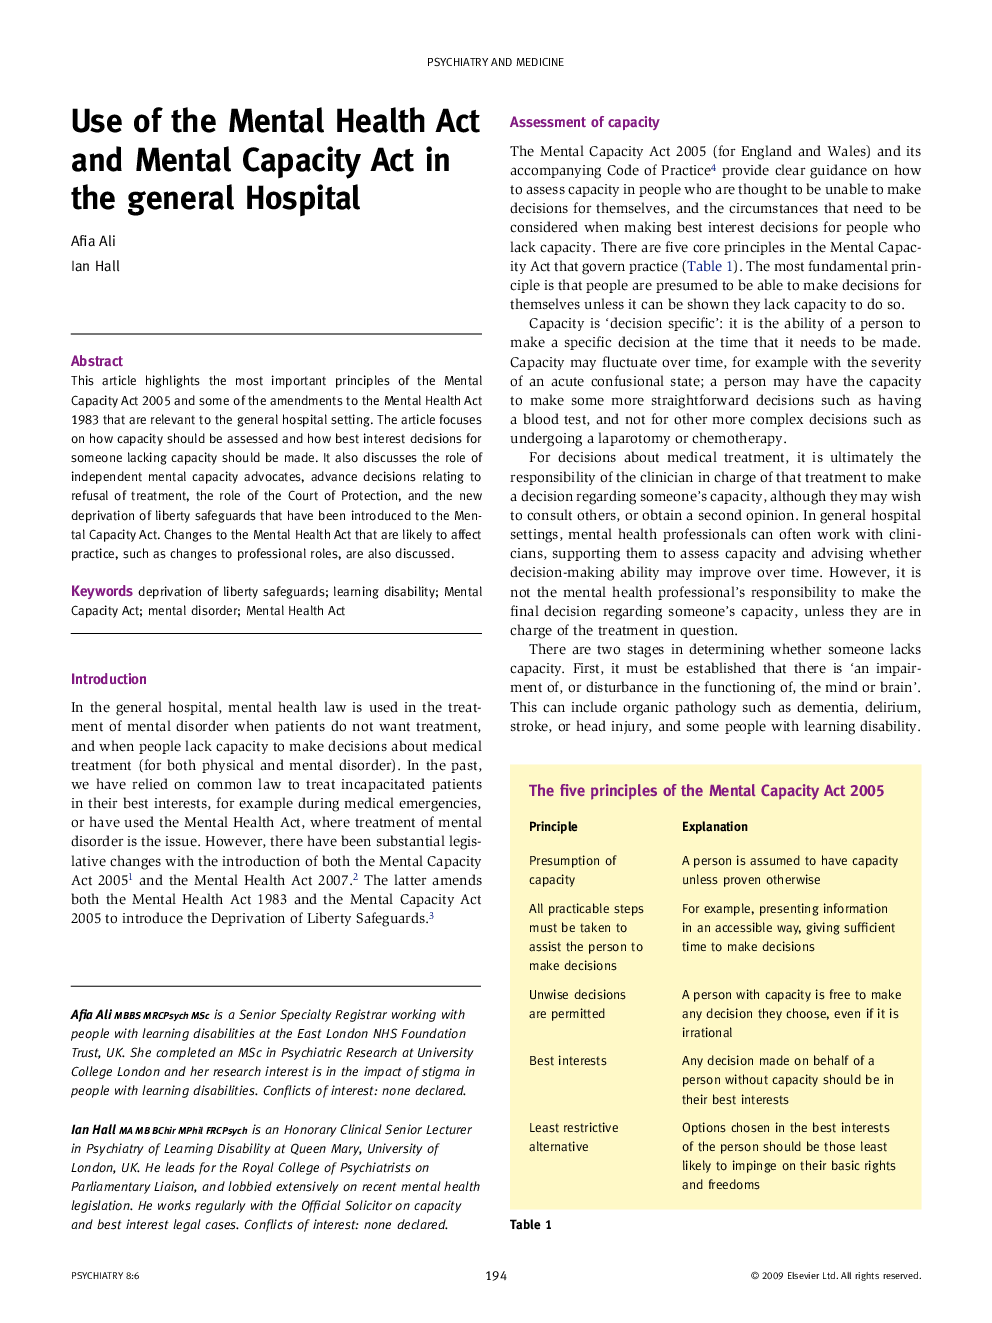 Use of the Mental Health Act and Mental Capacity Act in the general Hospital